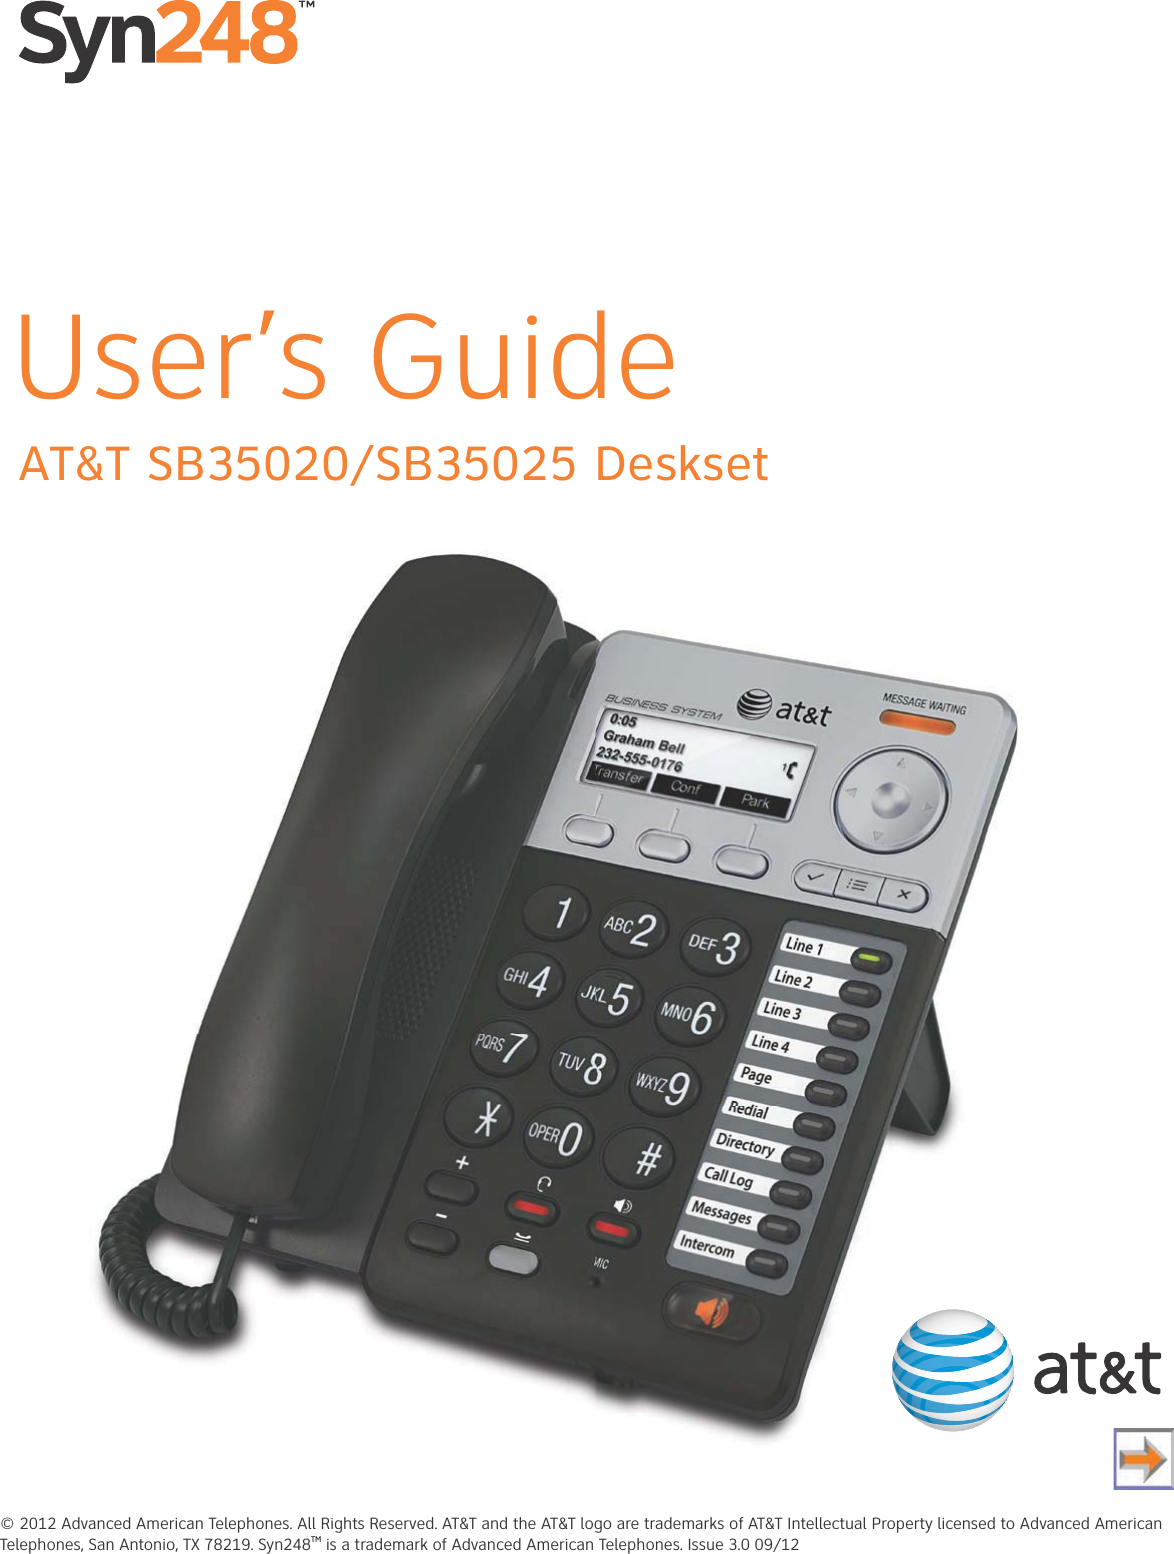 © 2012 Advanced American Telephones. All Rights Reserved. AT&amp;T and the AT&amp;T logo are trademarks of AT&amp;T Intellectual Property licensed to Advanced American Telephones, San Antonio, TX 78219. Syn248TM is a trademark of Advanced American Telephones. Issue 3.0 09/12AT&amp;T SB35020/SB35025 DesksetUser’s Guide